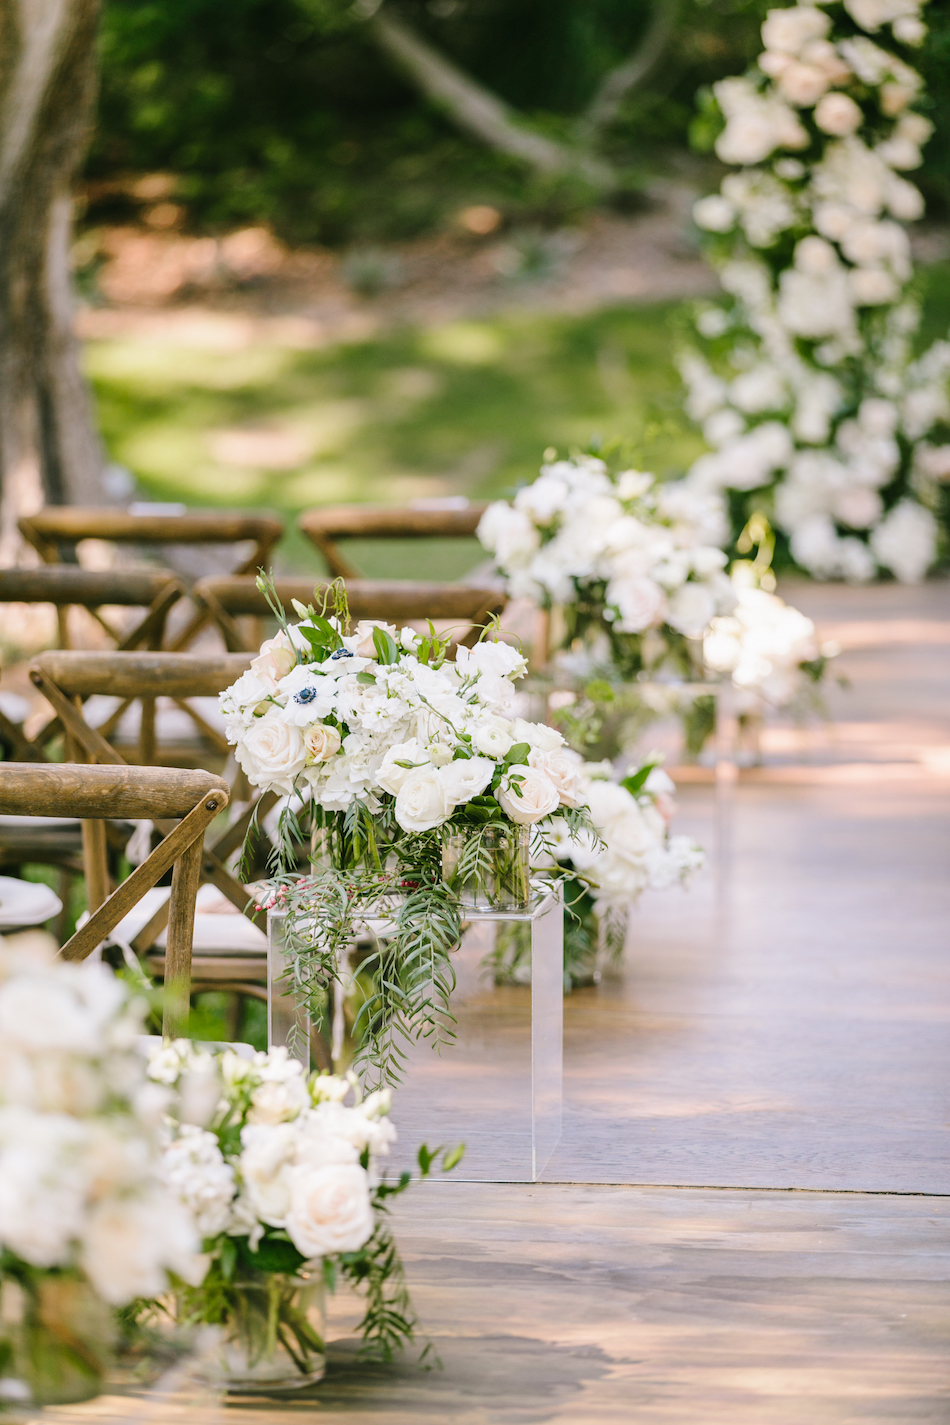 ceremony florals, ceremony blooms, aisle blooms, floral design, florist, wedding florist, wedding flowers, orange county weddings, orange county wedding florist, orange county florist, orange county floral design, flowers by cina